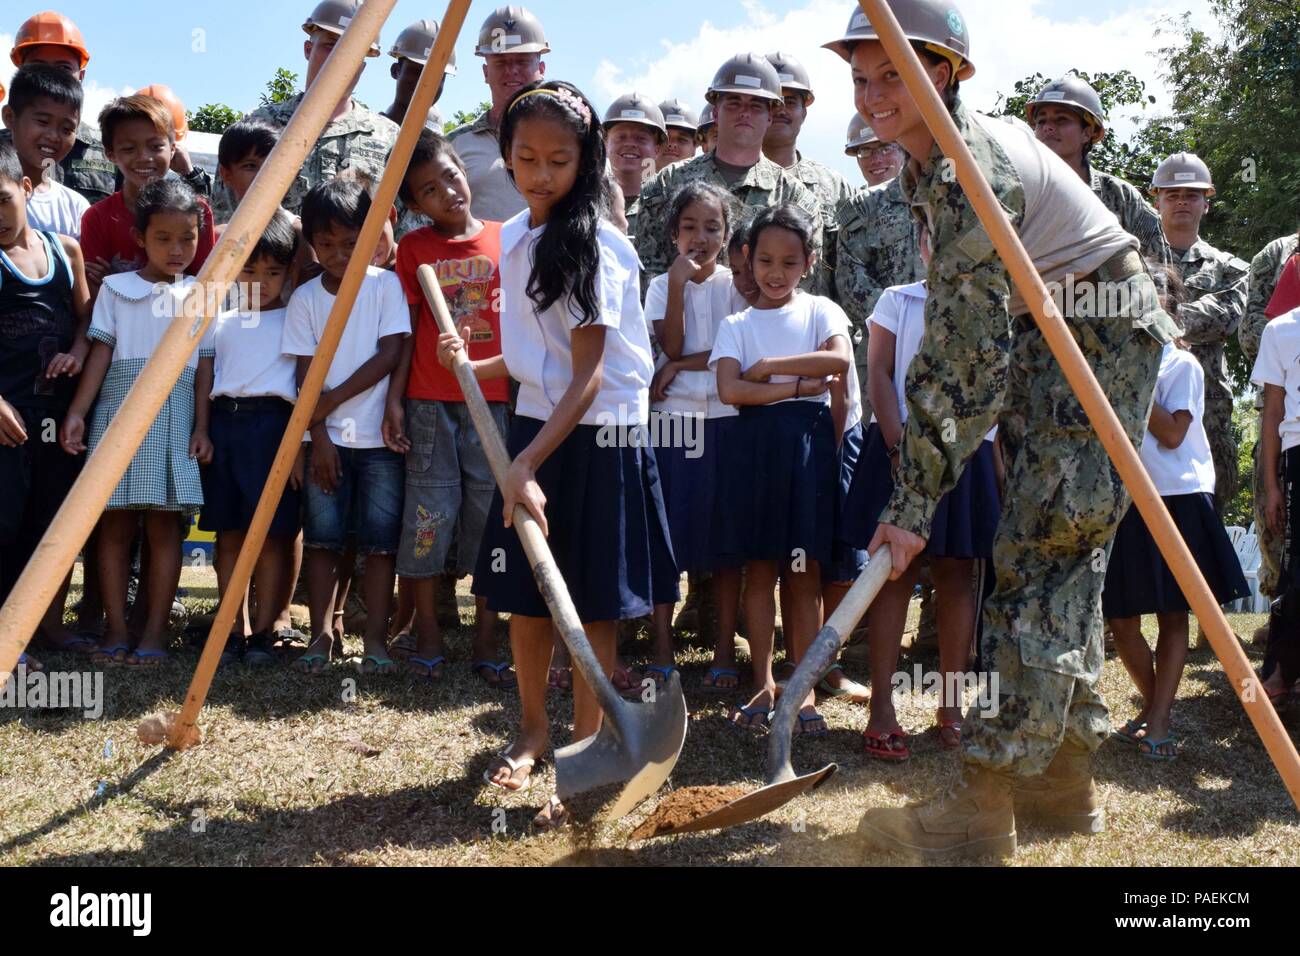 160321-N-NO181-003  PALAWAN, Philippines (Mar. 21, 2016) - Utilitiesman 3rd Class Victoria Vento, assigned to Naval Mobile Construction Battalion (NMCB) 4 helps a student at the Napsan Elementary School in Palawan, Philippines bury a time capsule before beginning a construction project, Mar. 21. (U.S. Navy photo by Construction Electrician Constructionman Samantha Leal/Released) Stock Photo